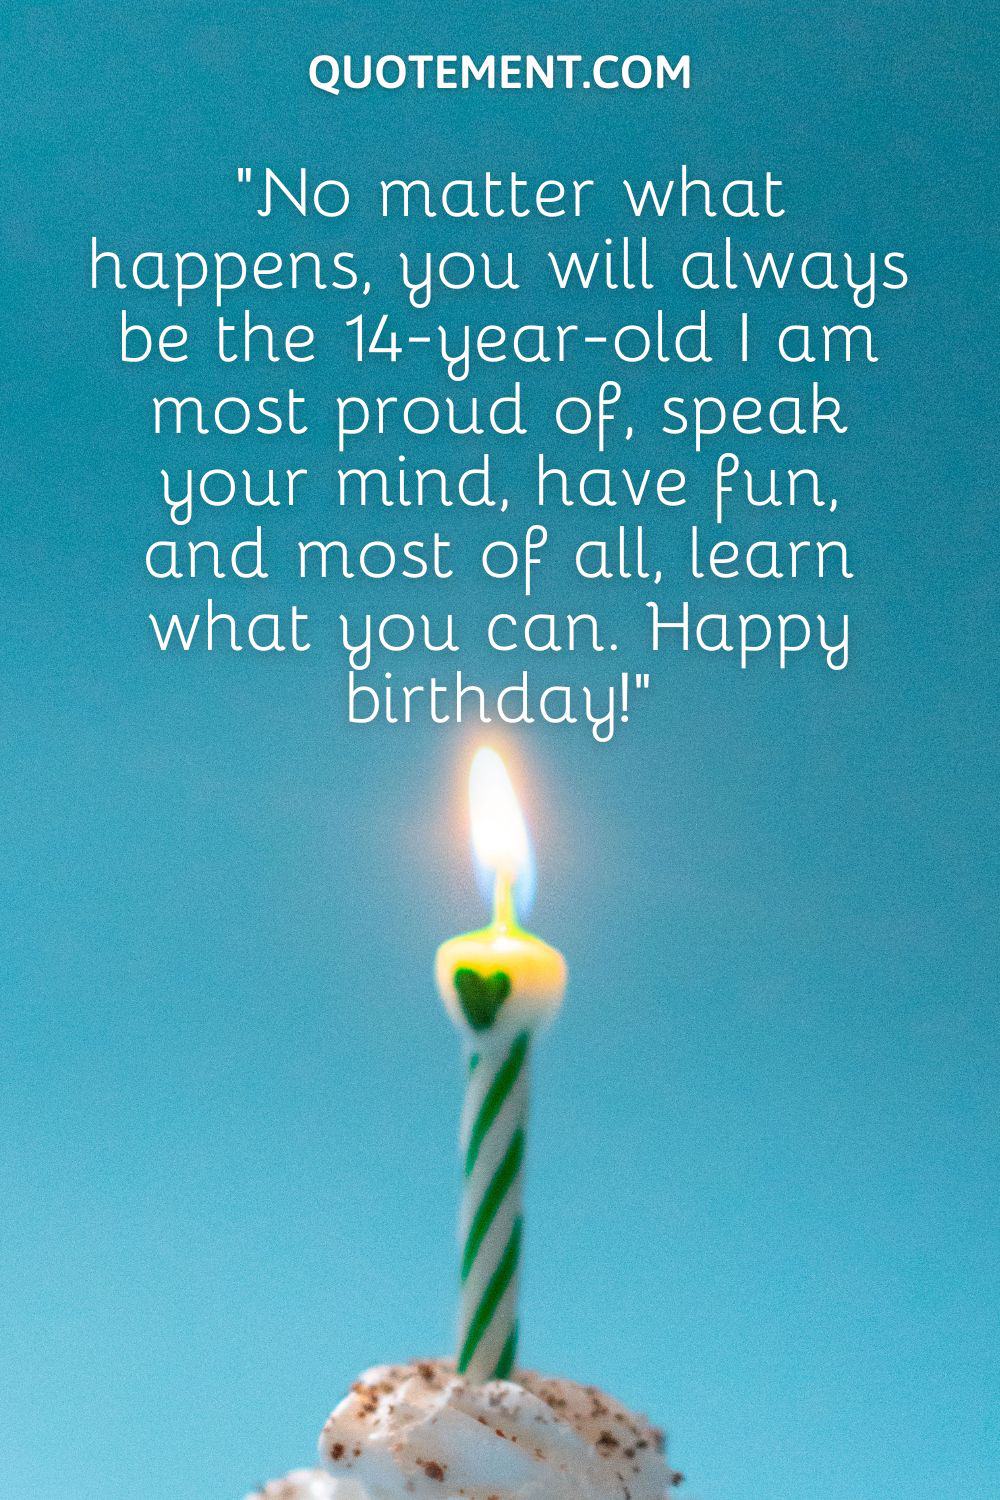 “No matter what happens, you will always be the 14-year-old I am most proud of, speak your mind, have fun, and most of all, learn what you can. Happy birthday!”